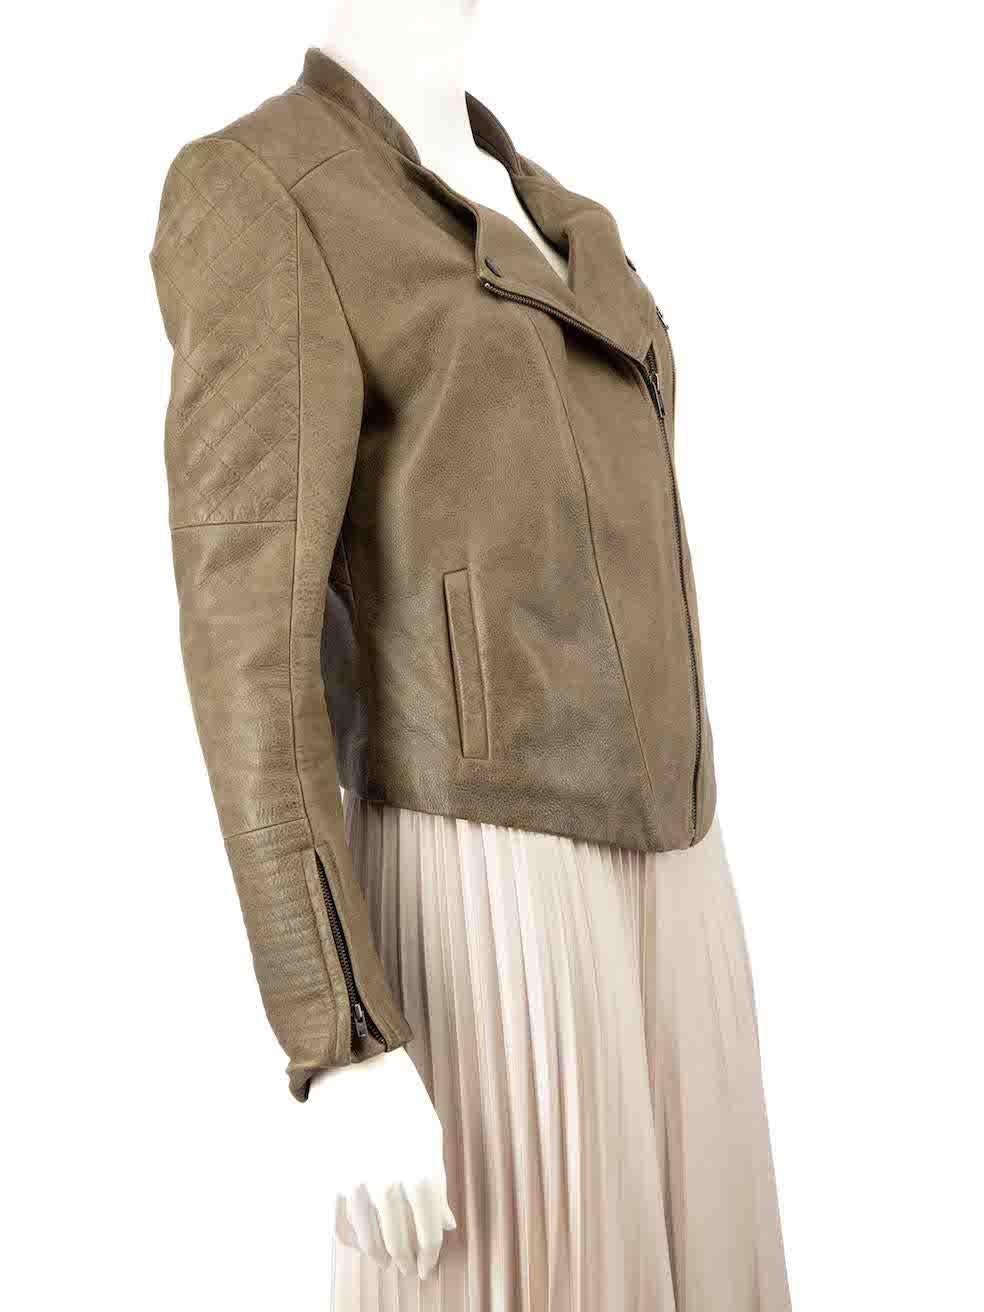 CONDITION is Very good. Minimal wear to jacket is evident. Minimal wear to the front buttons with light scratches to the metal on this used Francis Leon designer resale item.
 
 
 
 Details
 
 
 Khaki
 
 Leather
 
 Biker jacket
 
 Asymmetric zip